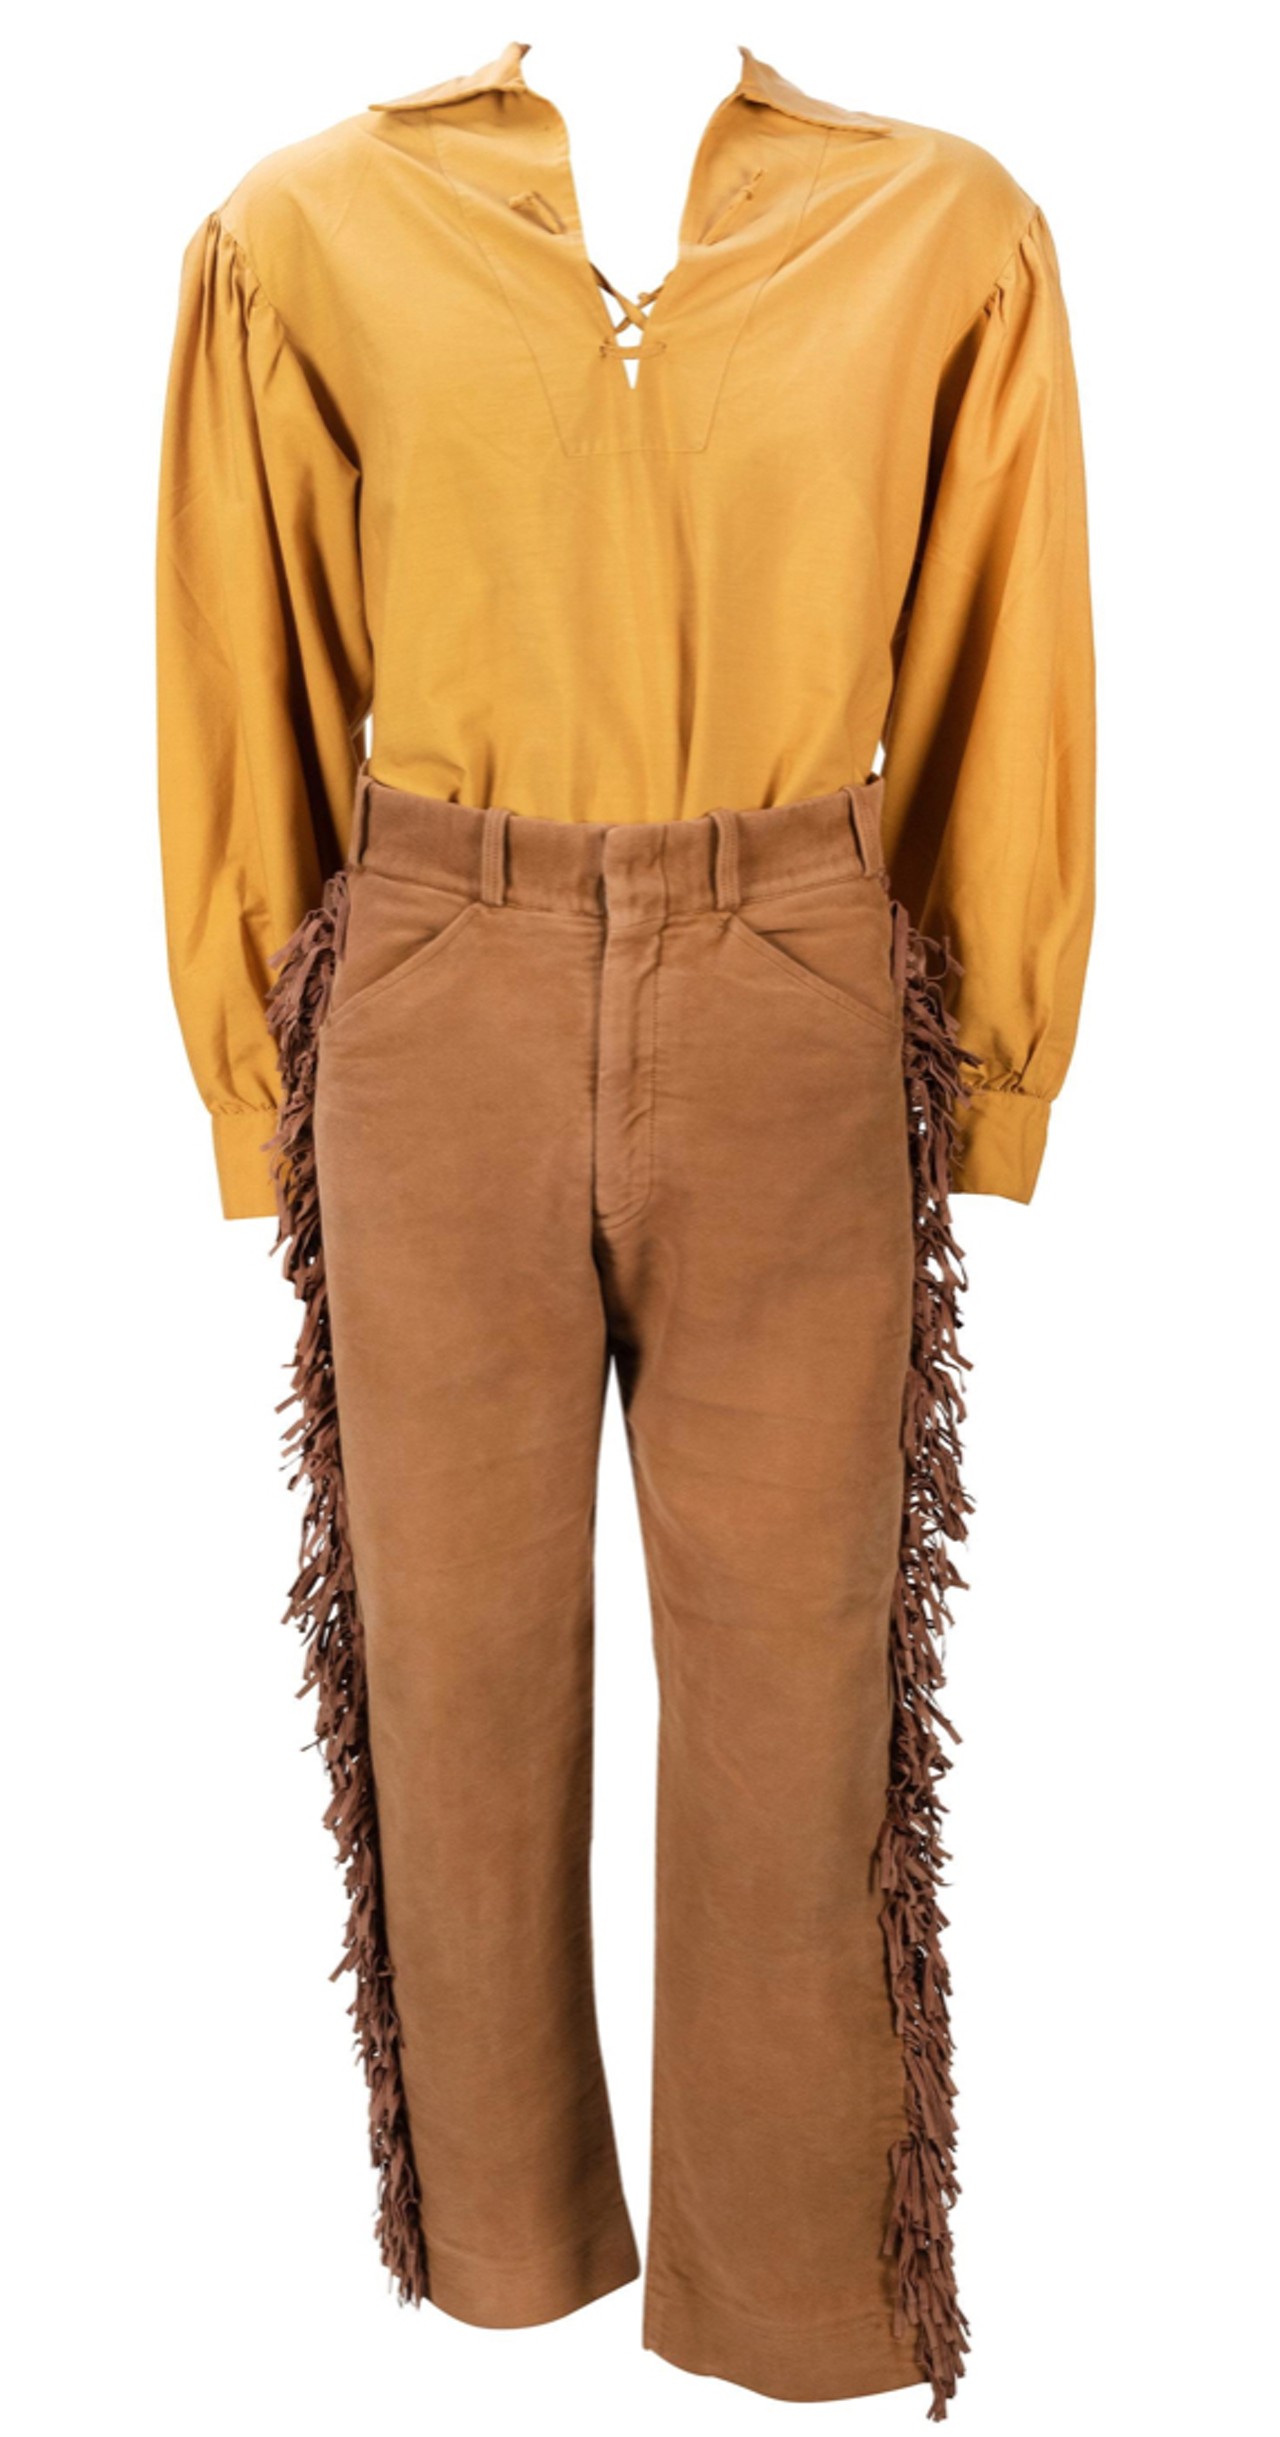 Disneyland Davy Crockett Canoes costume
Estimated Sale Price: $900-1,200 
This uniform was worn by cast members who ran the Davy
Crockett Canoes on the Rivers of America and includes a shirt and pants.